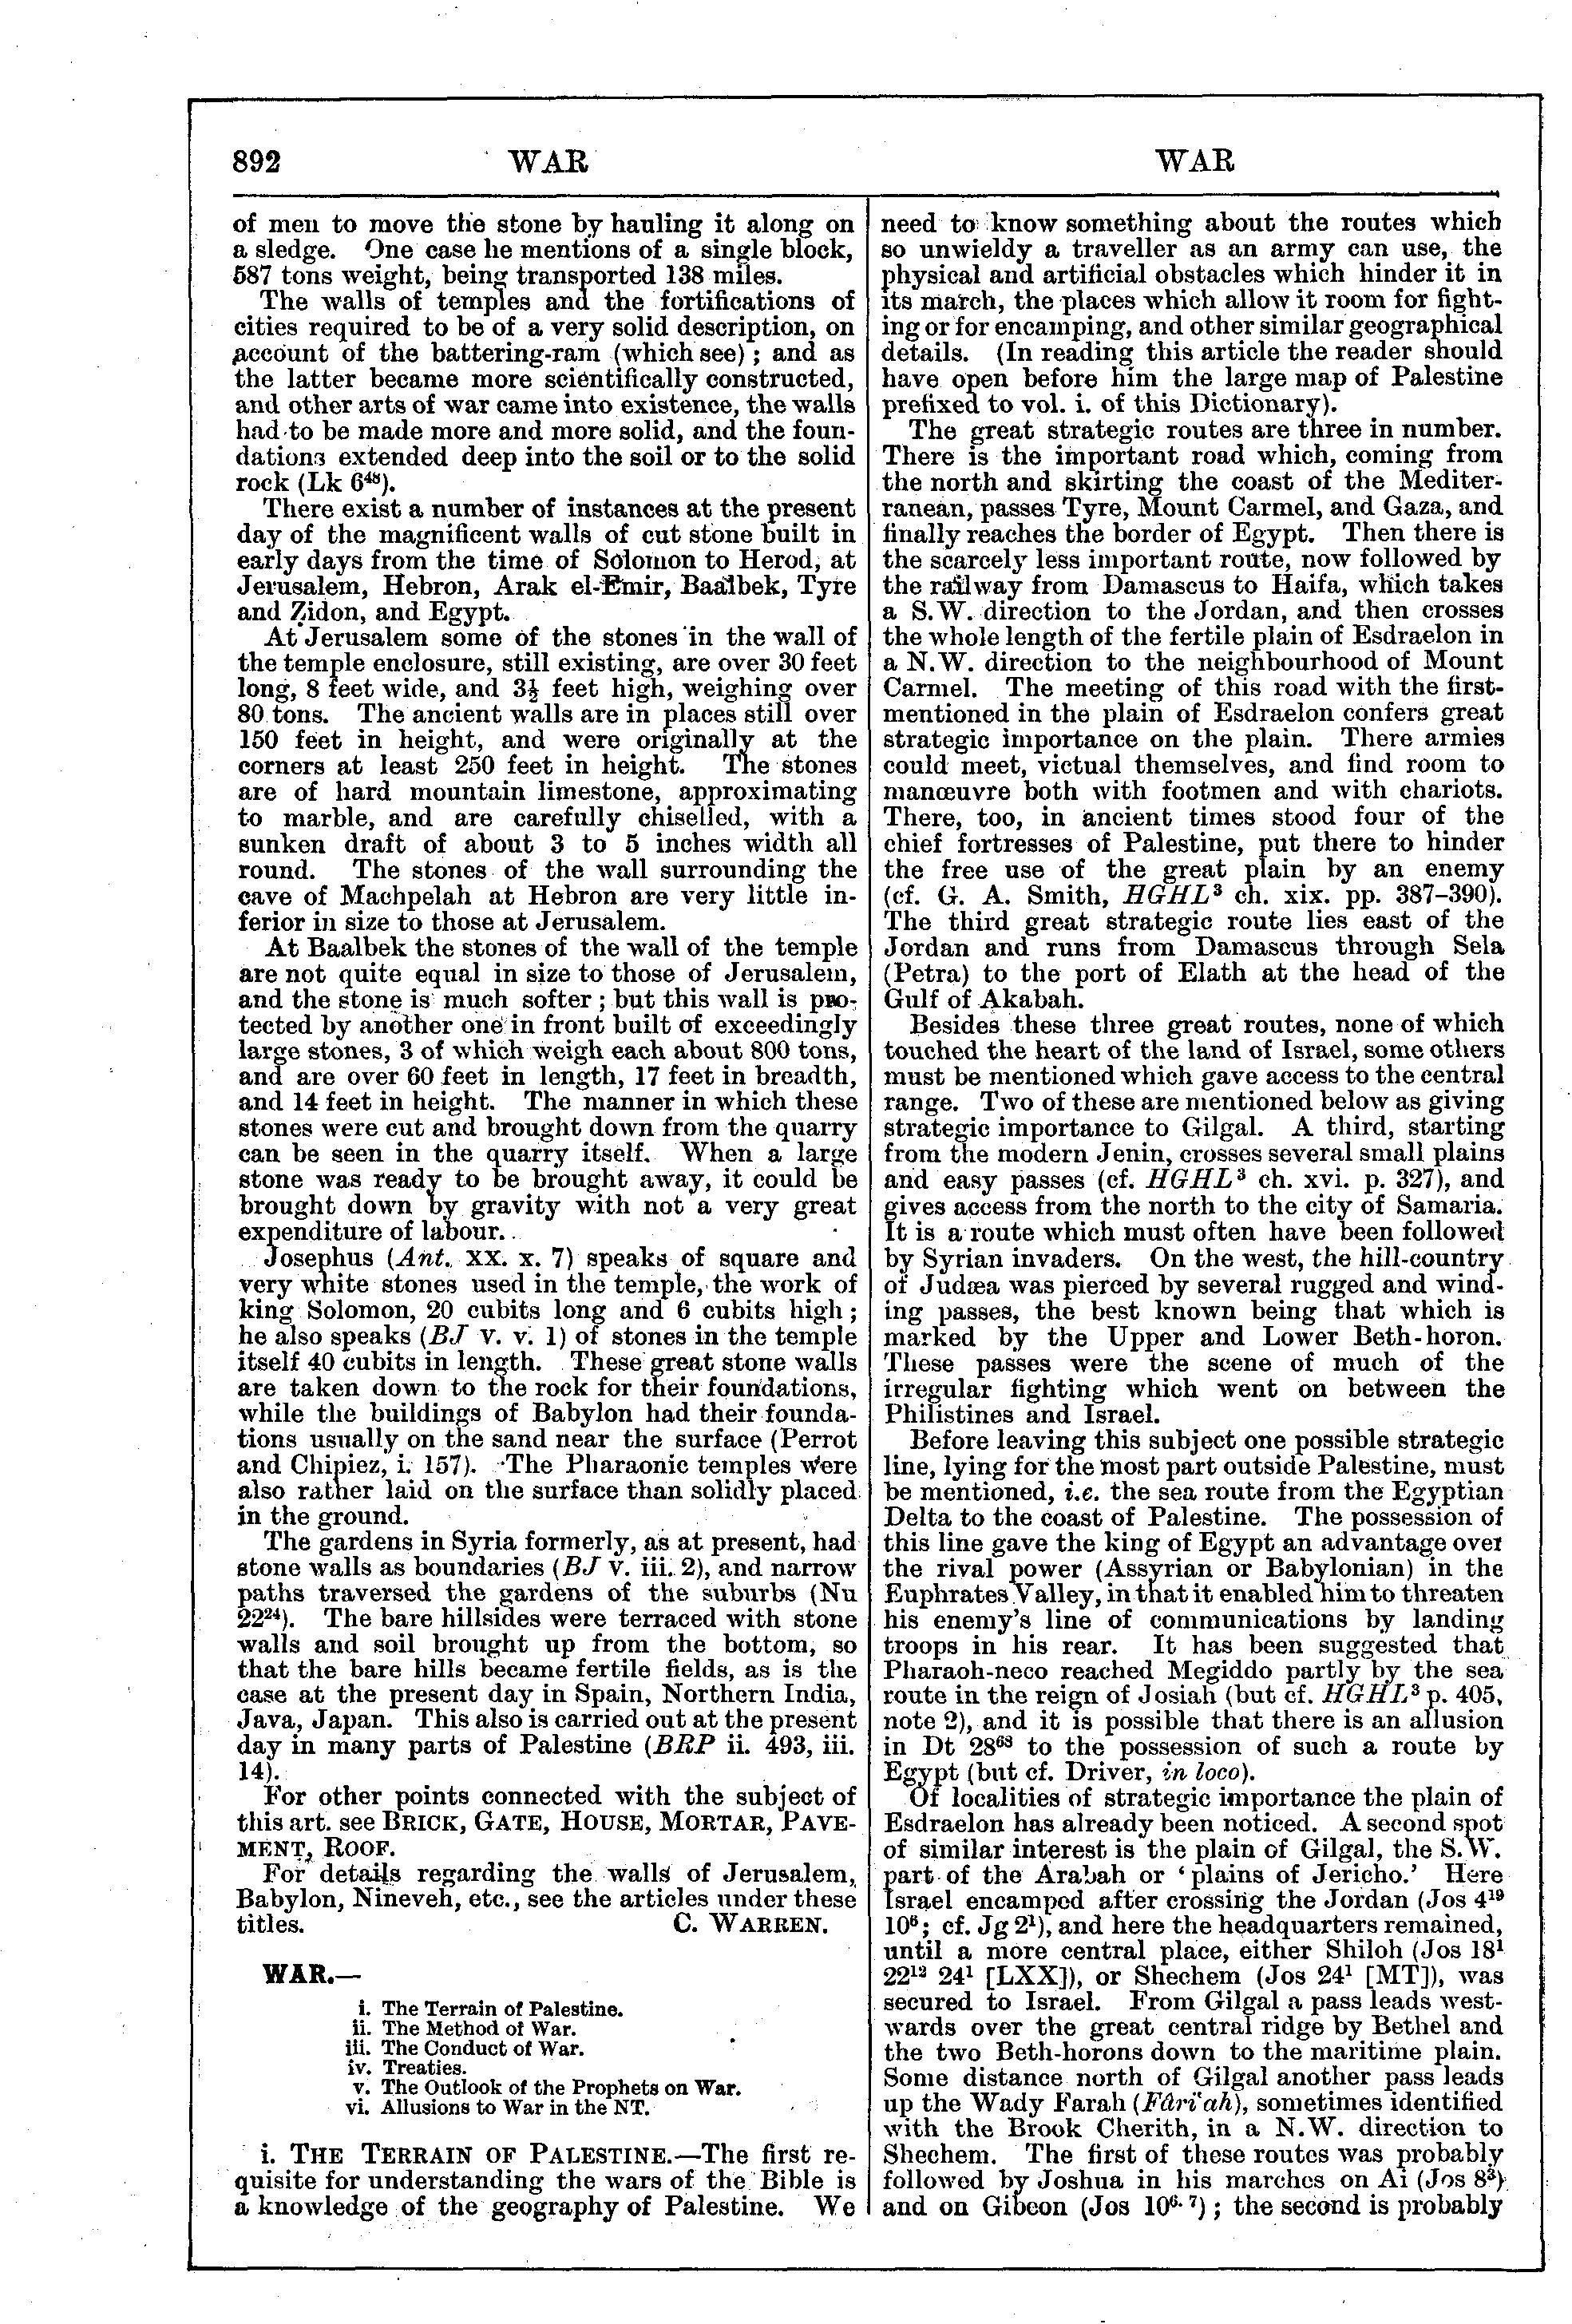 Image of page 892